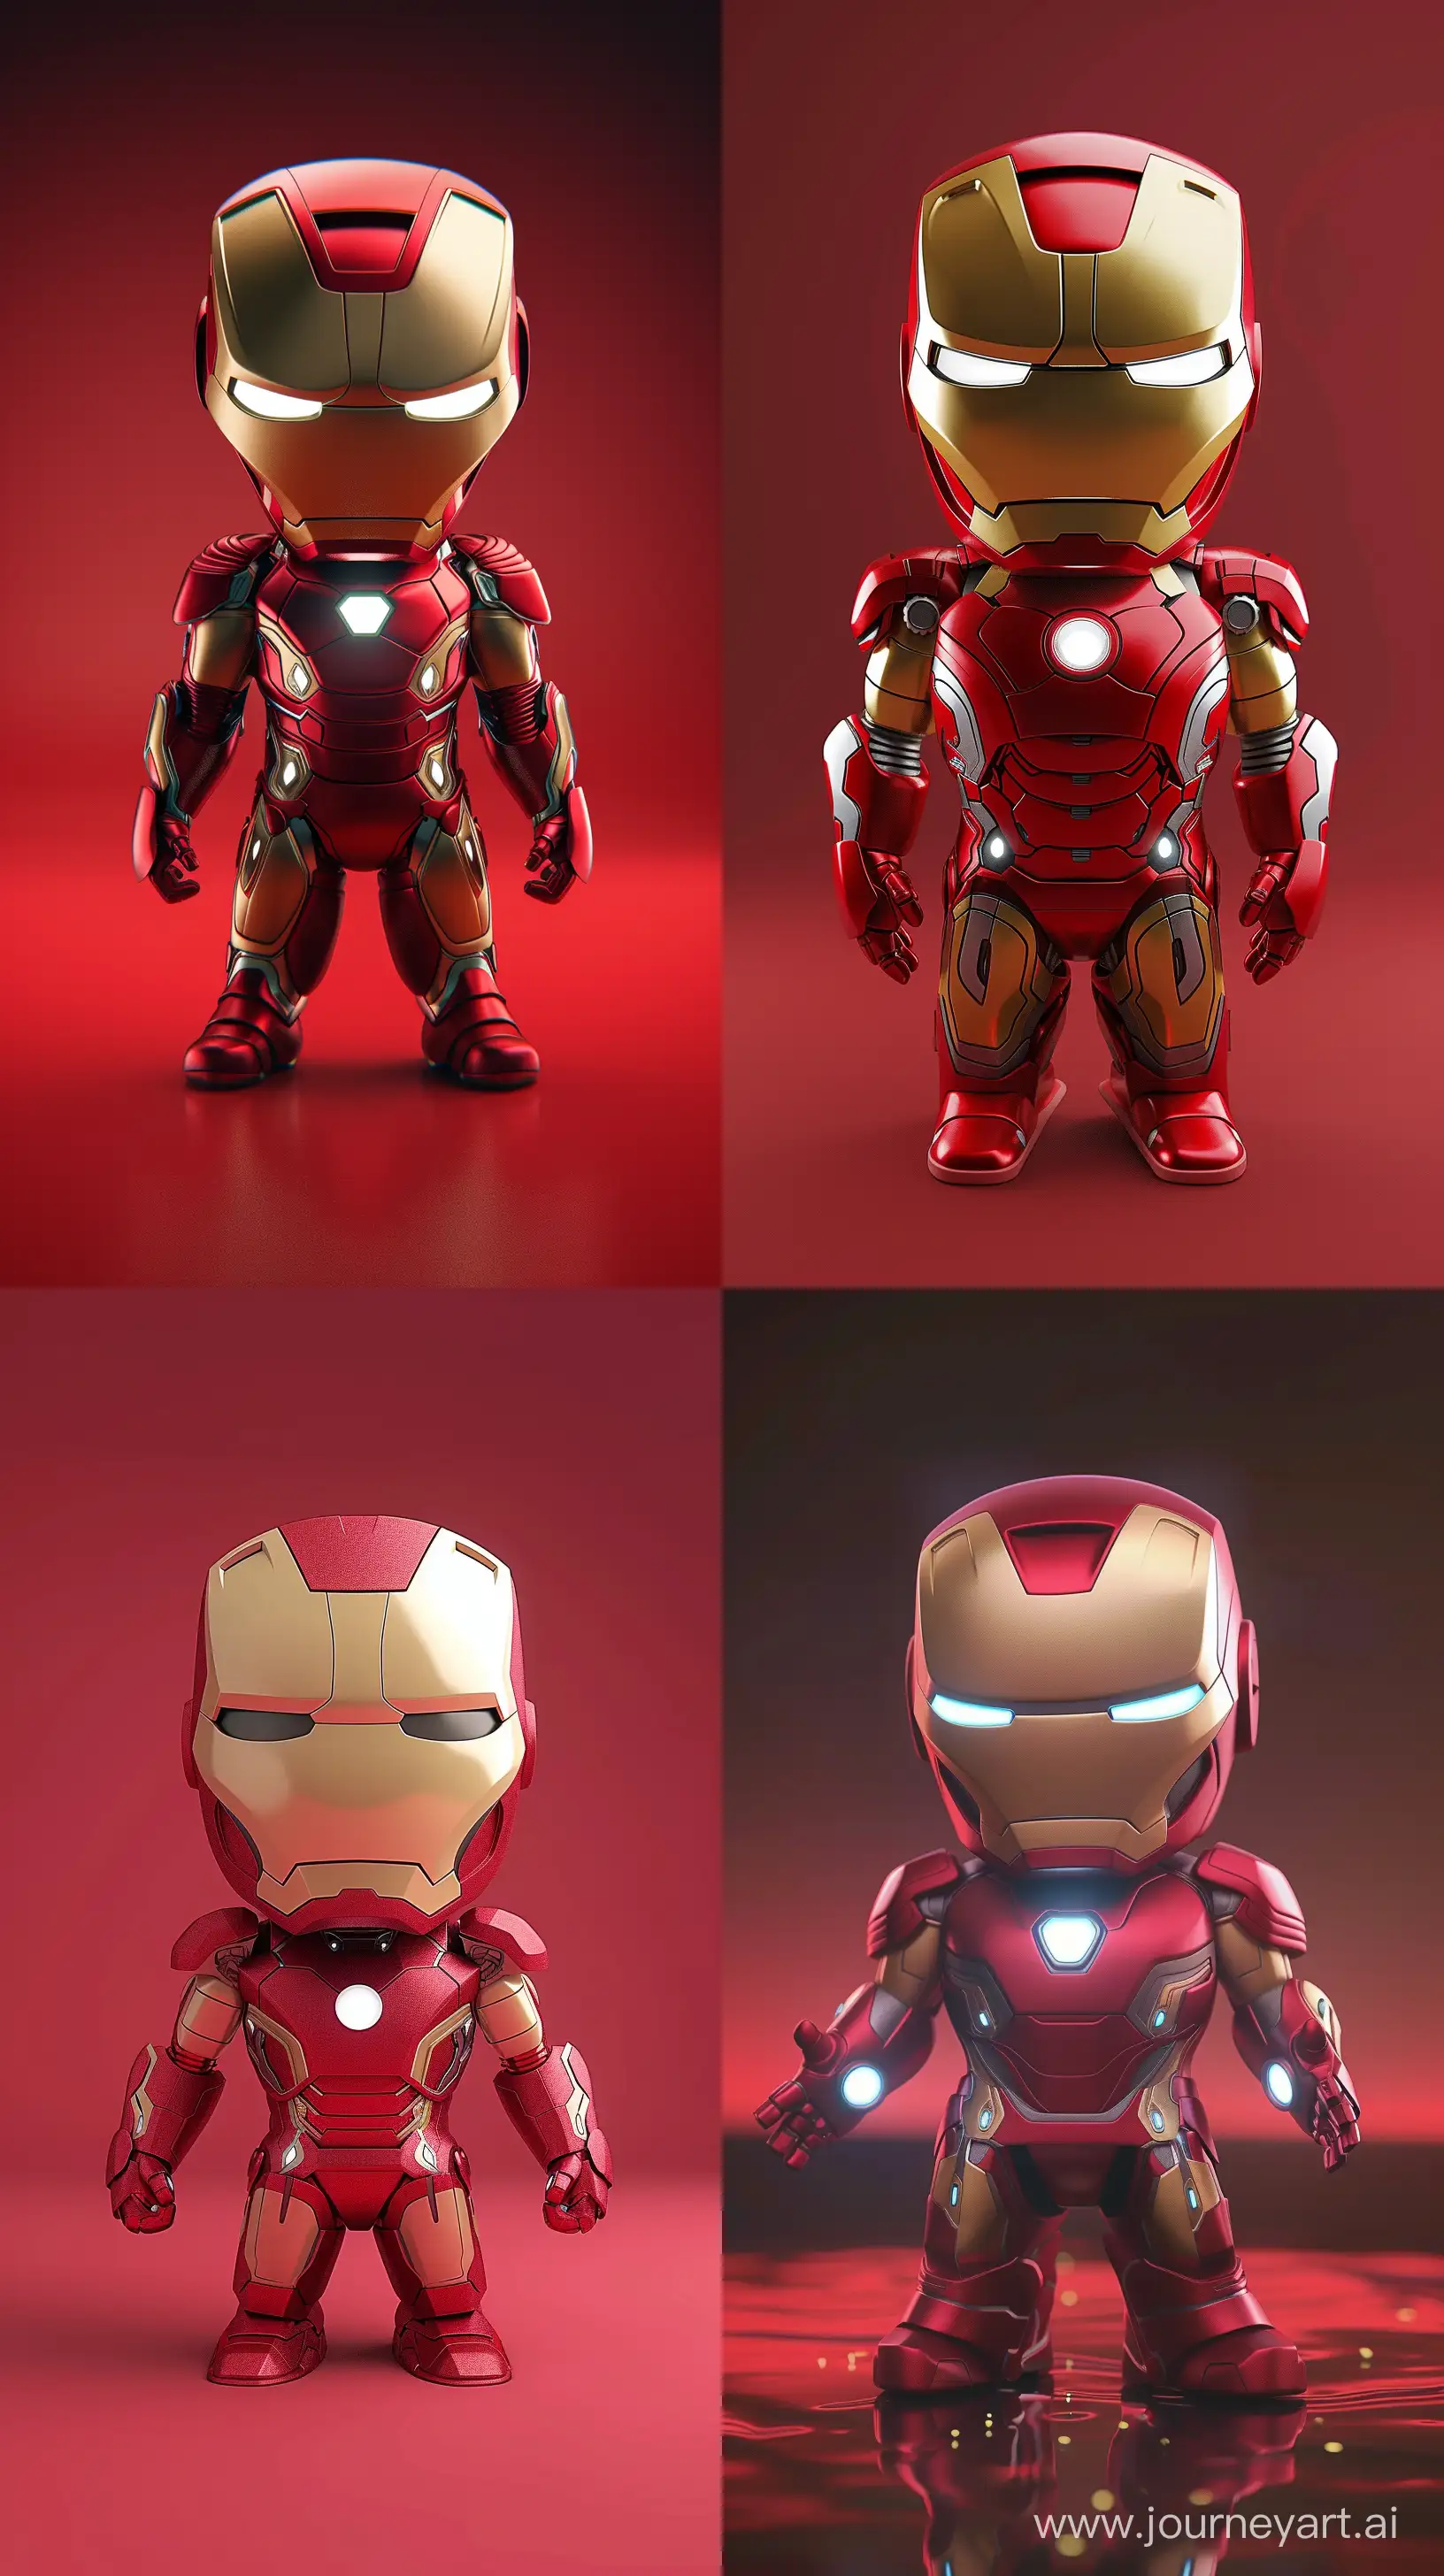 Adorable-Iron-Man-Character-in-Dynamic-Animation-Scene